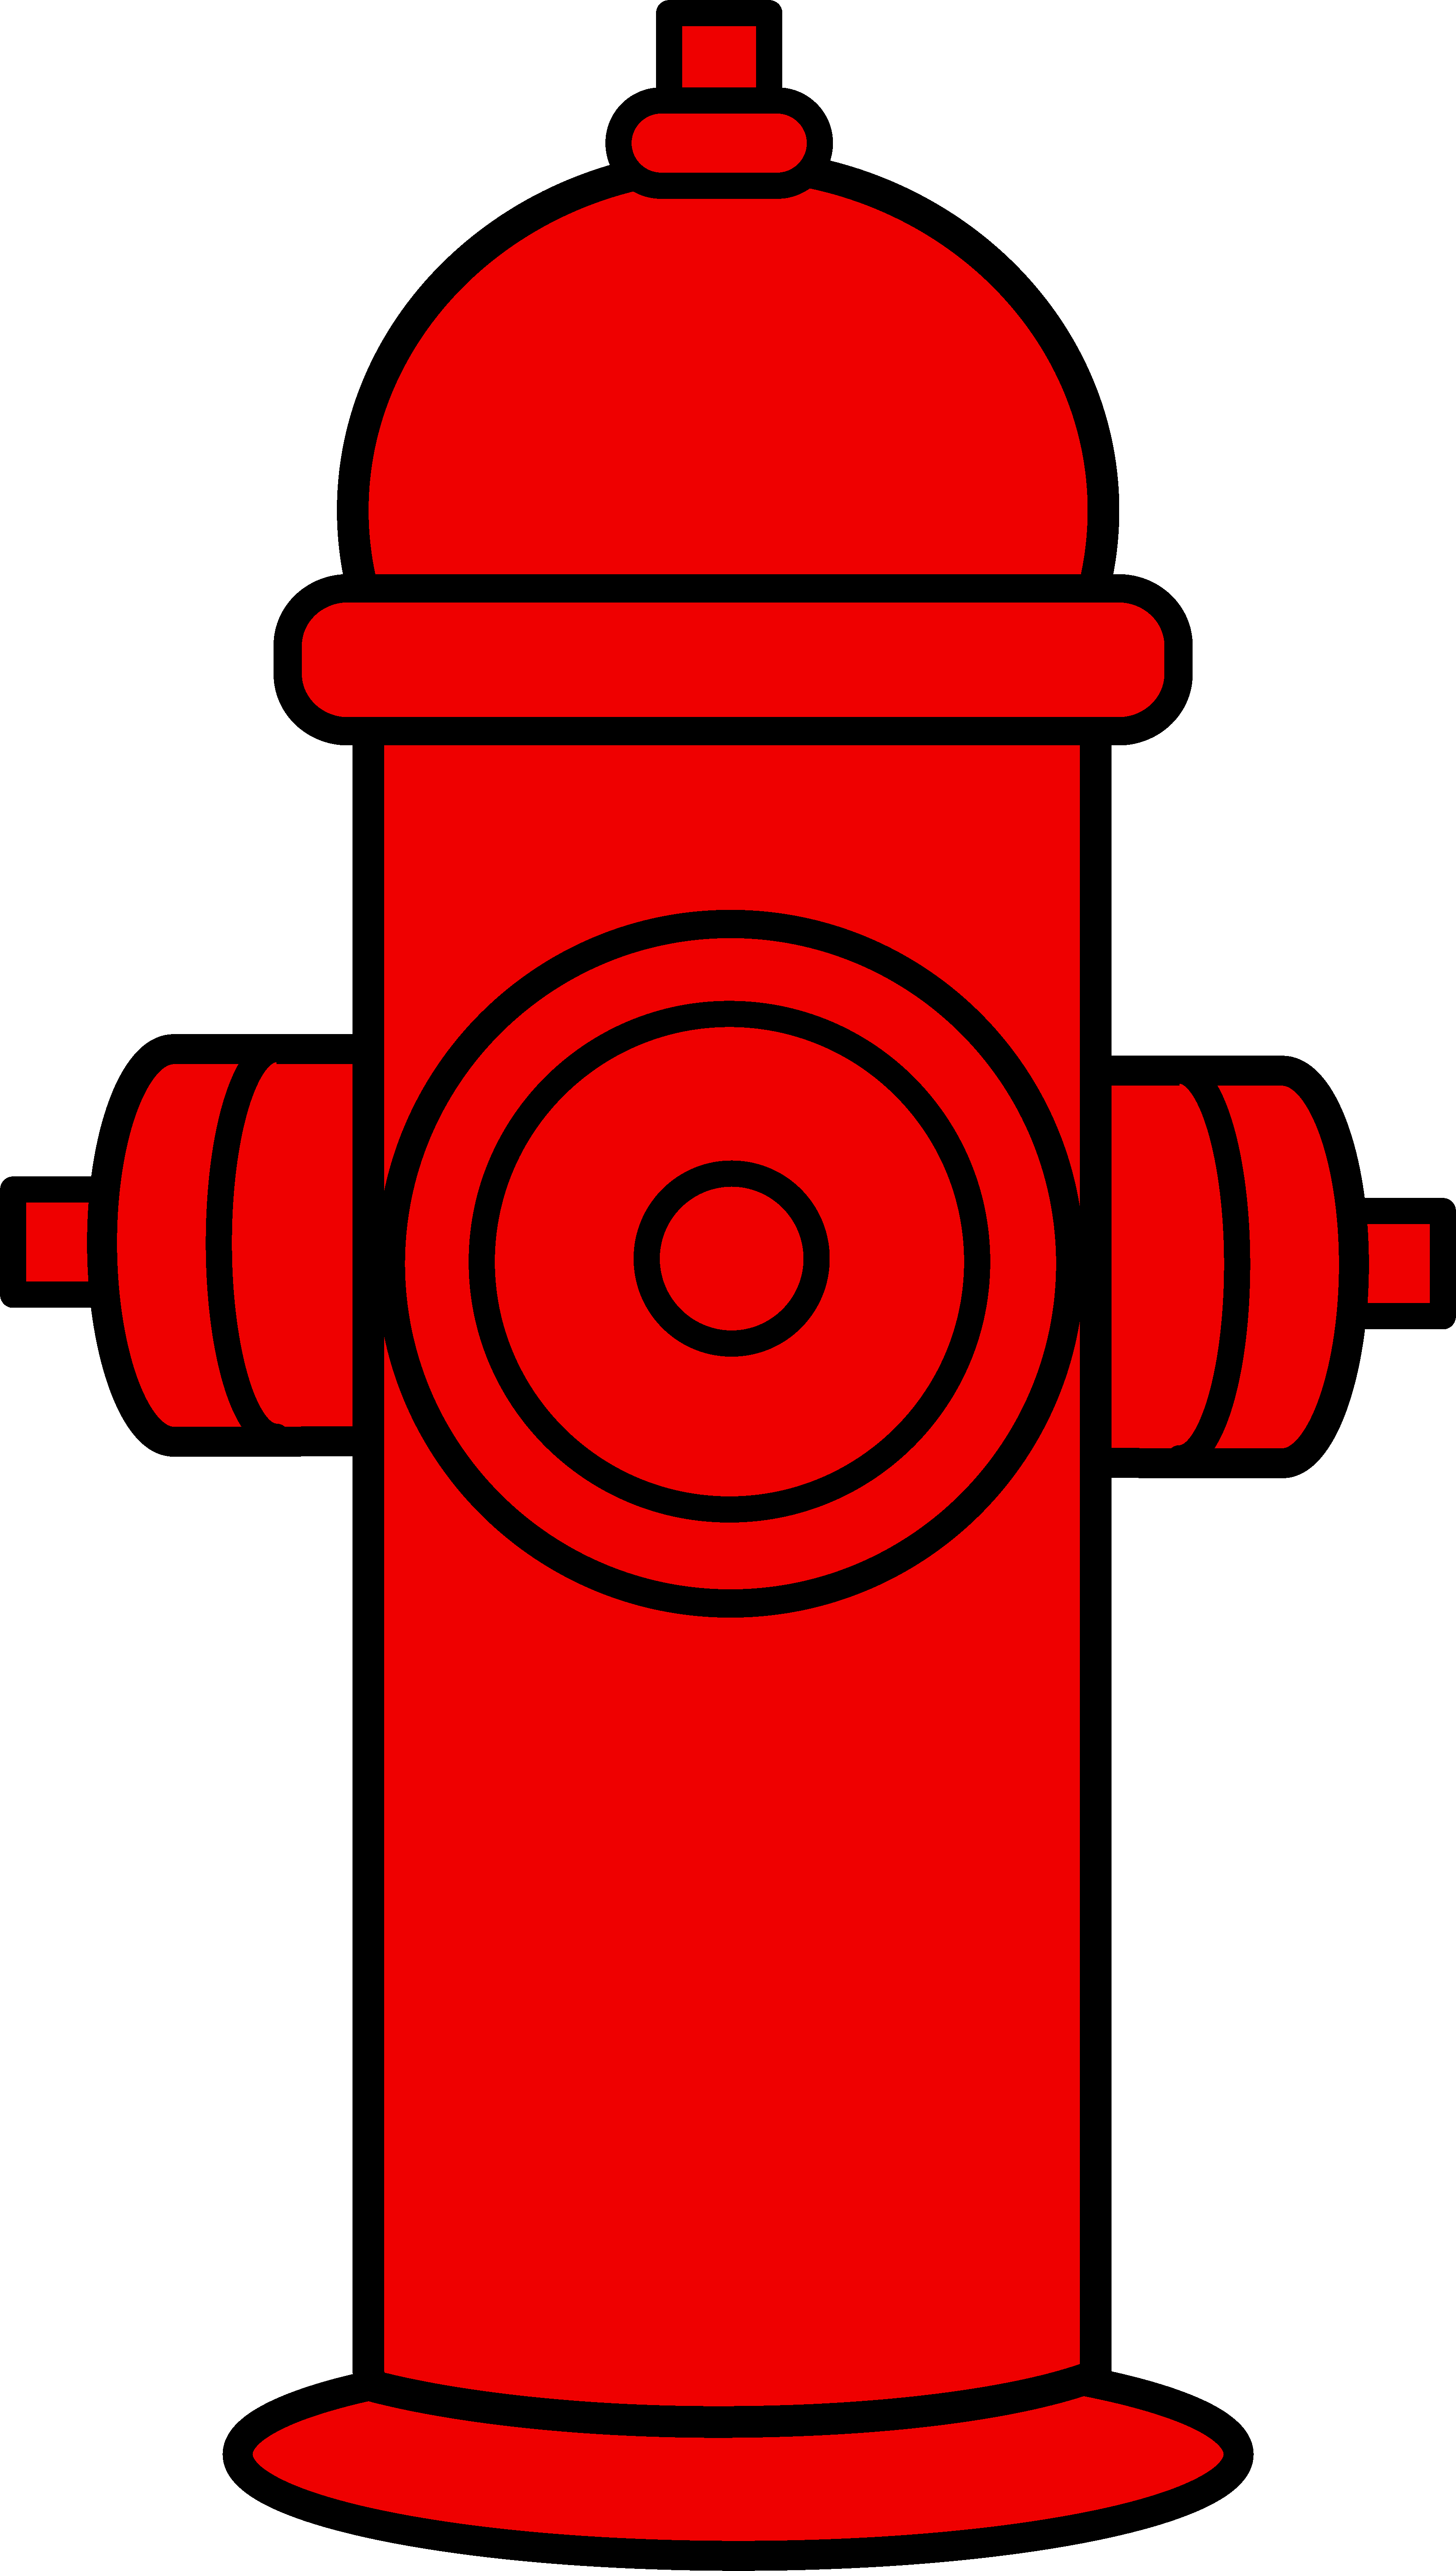 Fireman clipart outline. Red fire hydrant kub